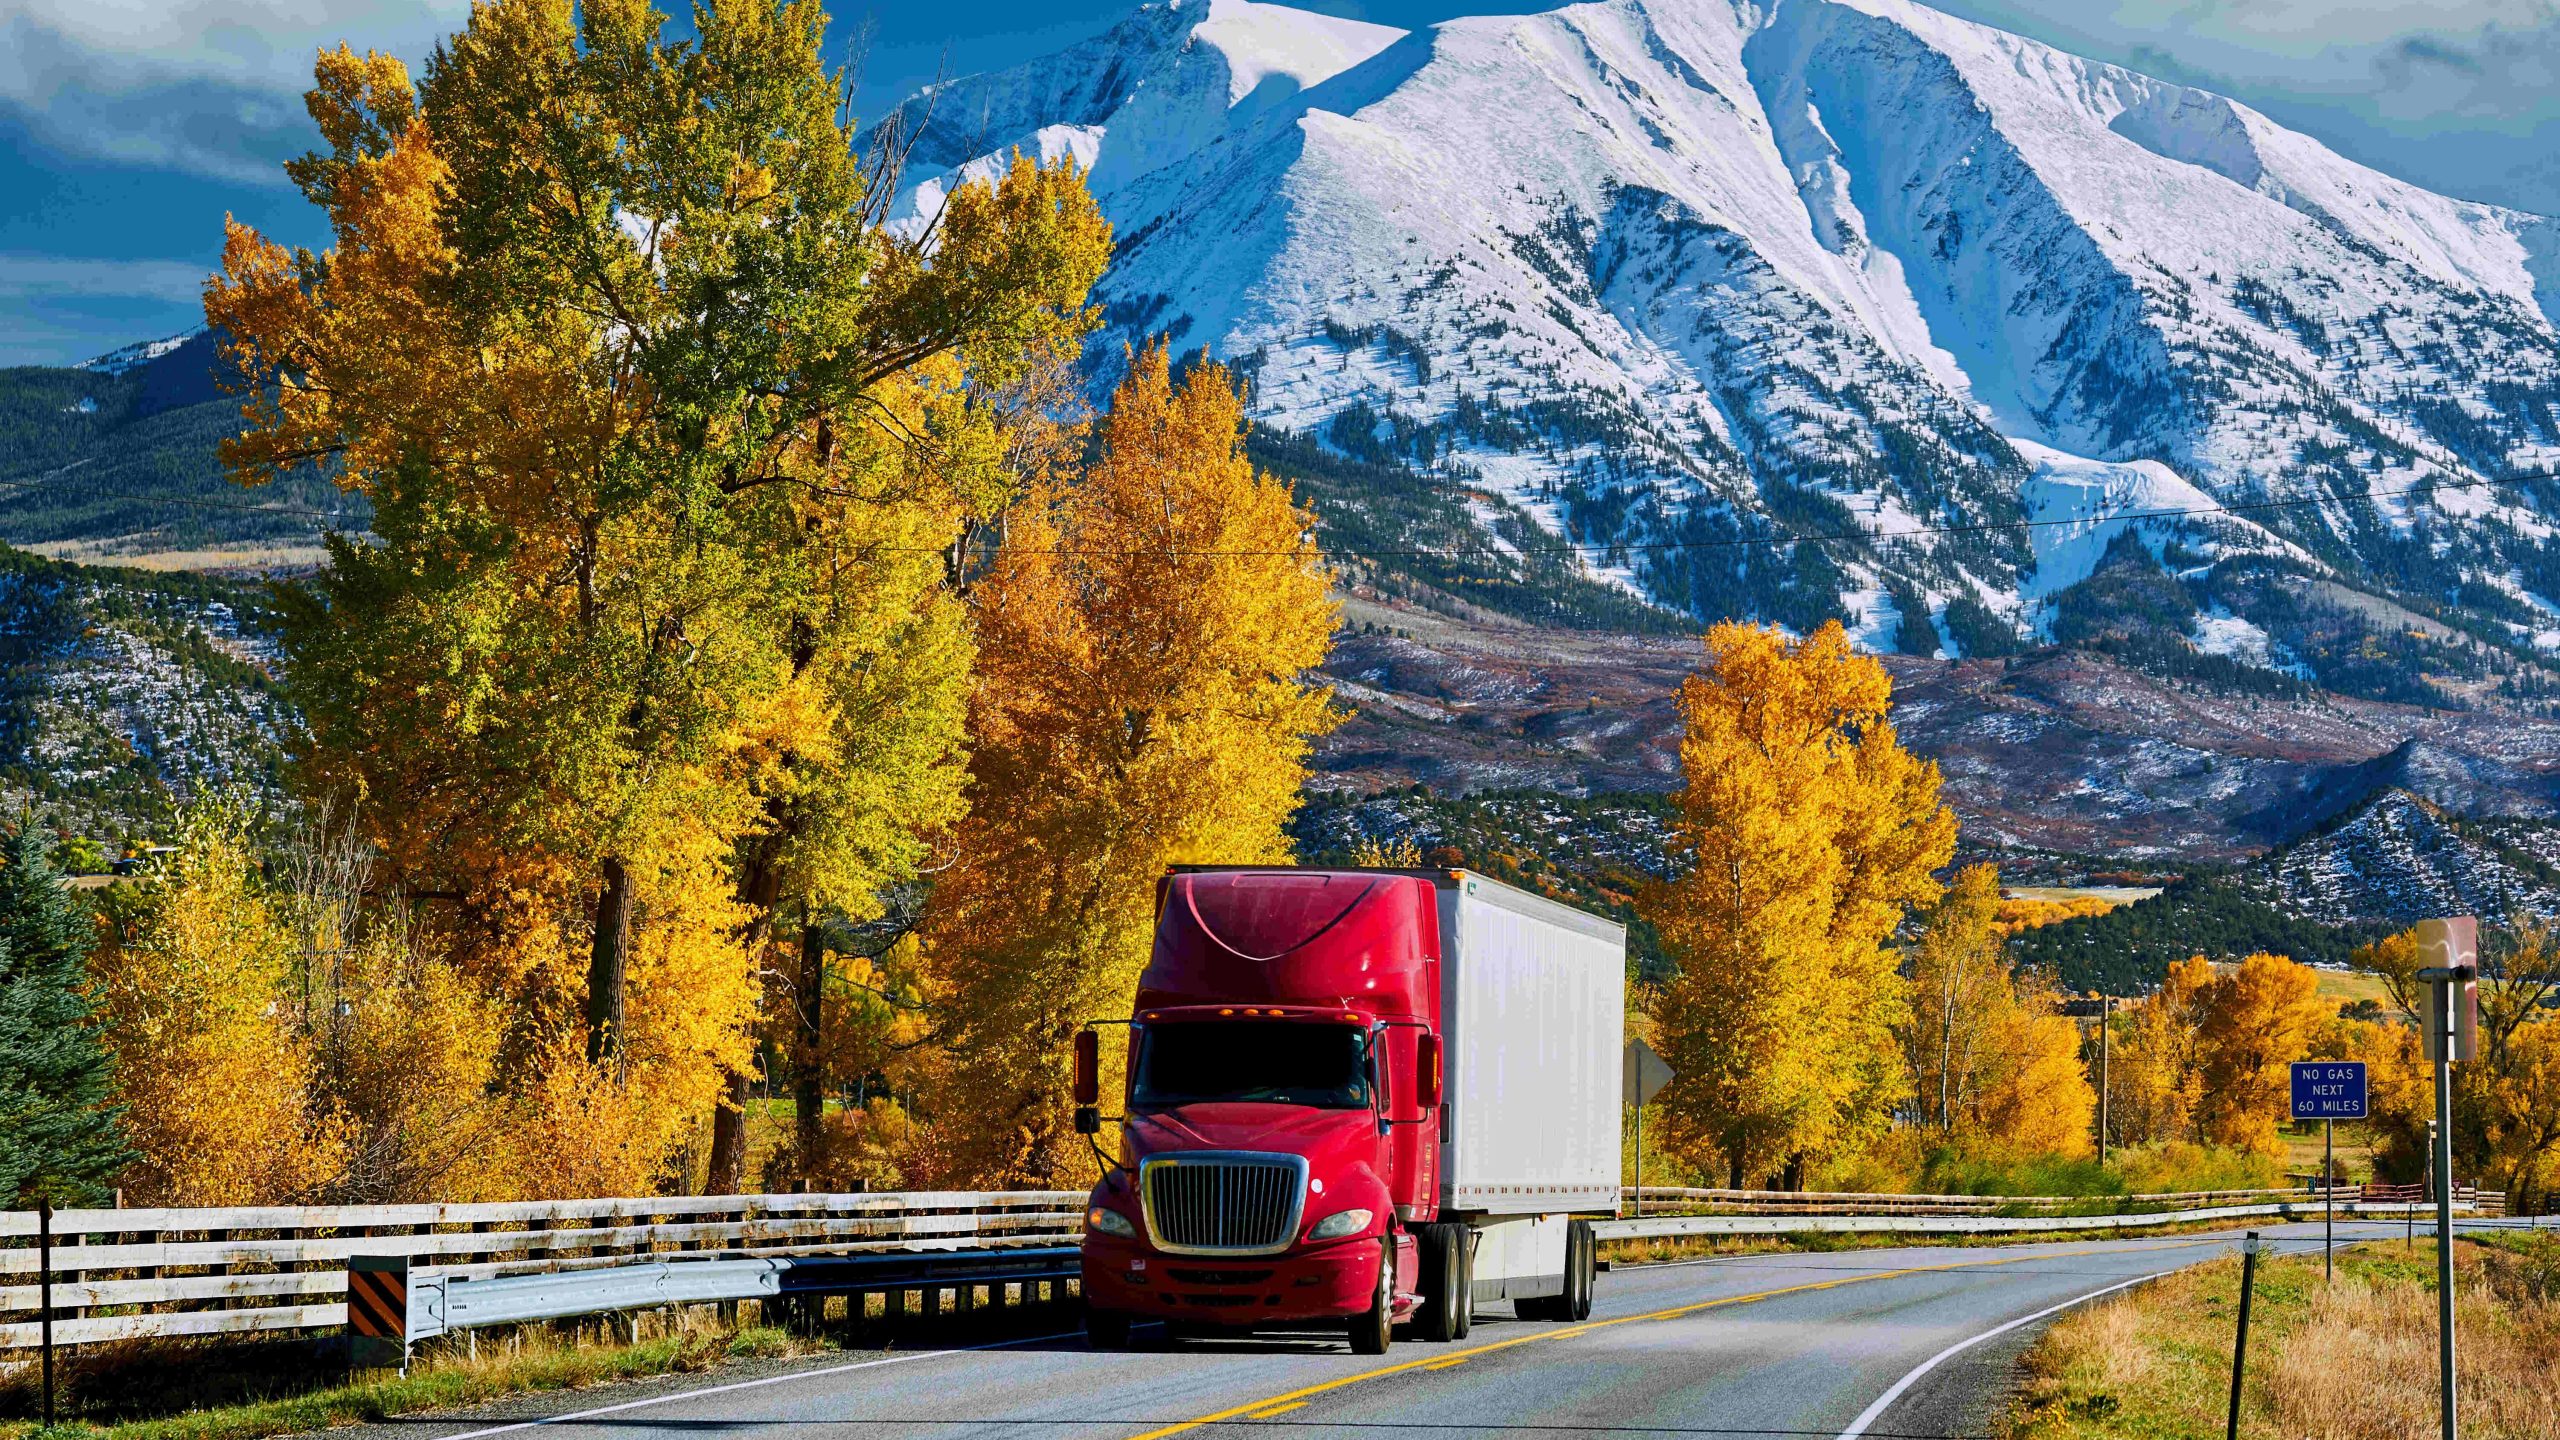 Red semi-truck for Managed Transportation services cruising through autumn foliage with snow-capped mountains in the background.